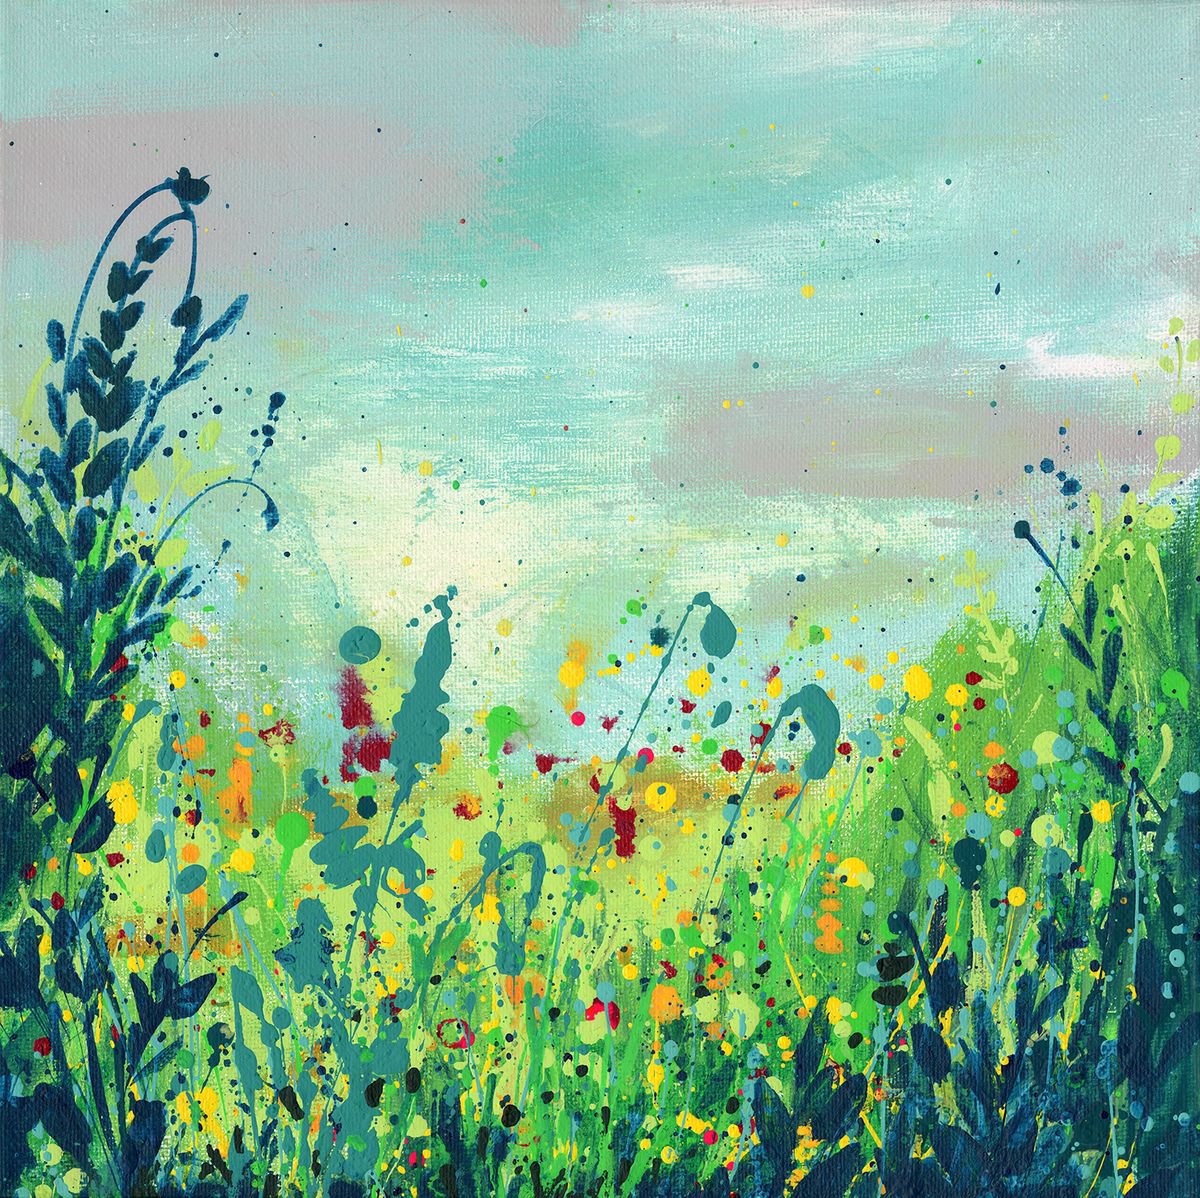 Afternoon Delight 2  -  Abstract Meadow Flower Painting  by Kathy Morton Stanion by Kathy Morton Stanion